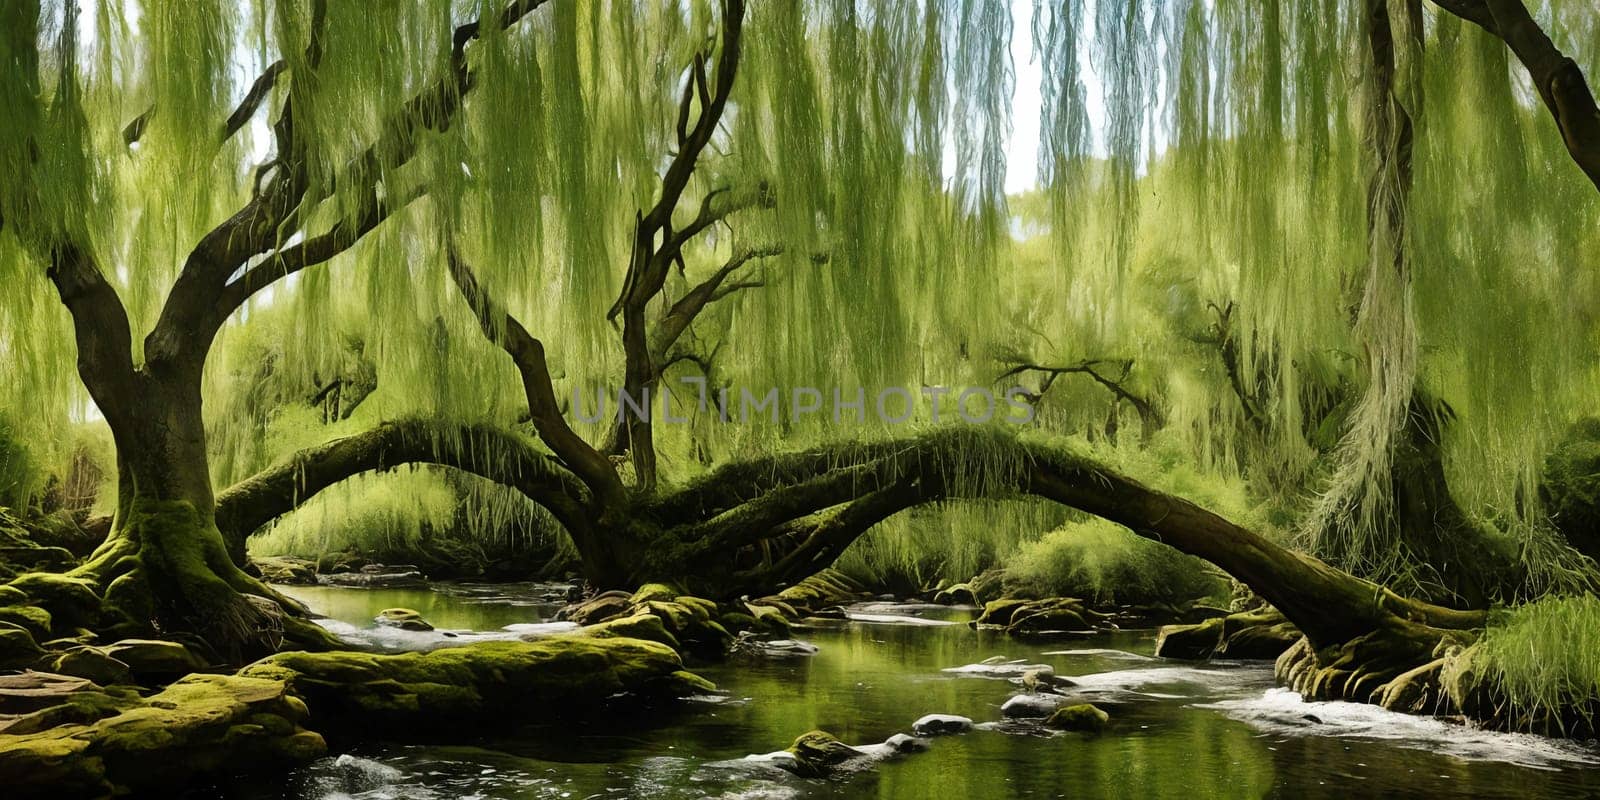 Whispering Willow Grove. Beneath ancient willow trees, their long branches trailing in a silver rive by GoodOlga